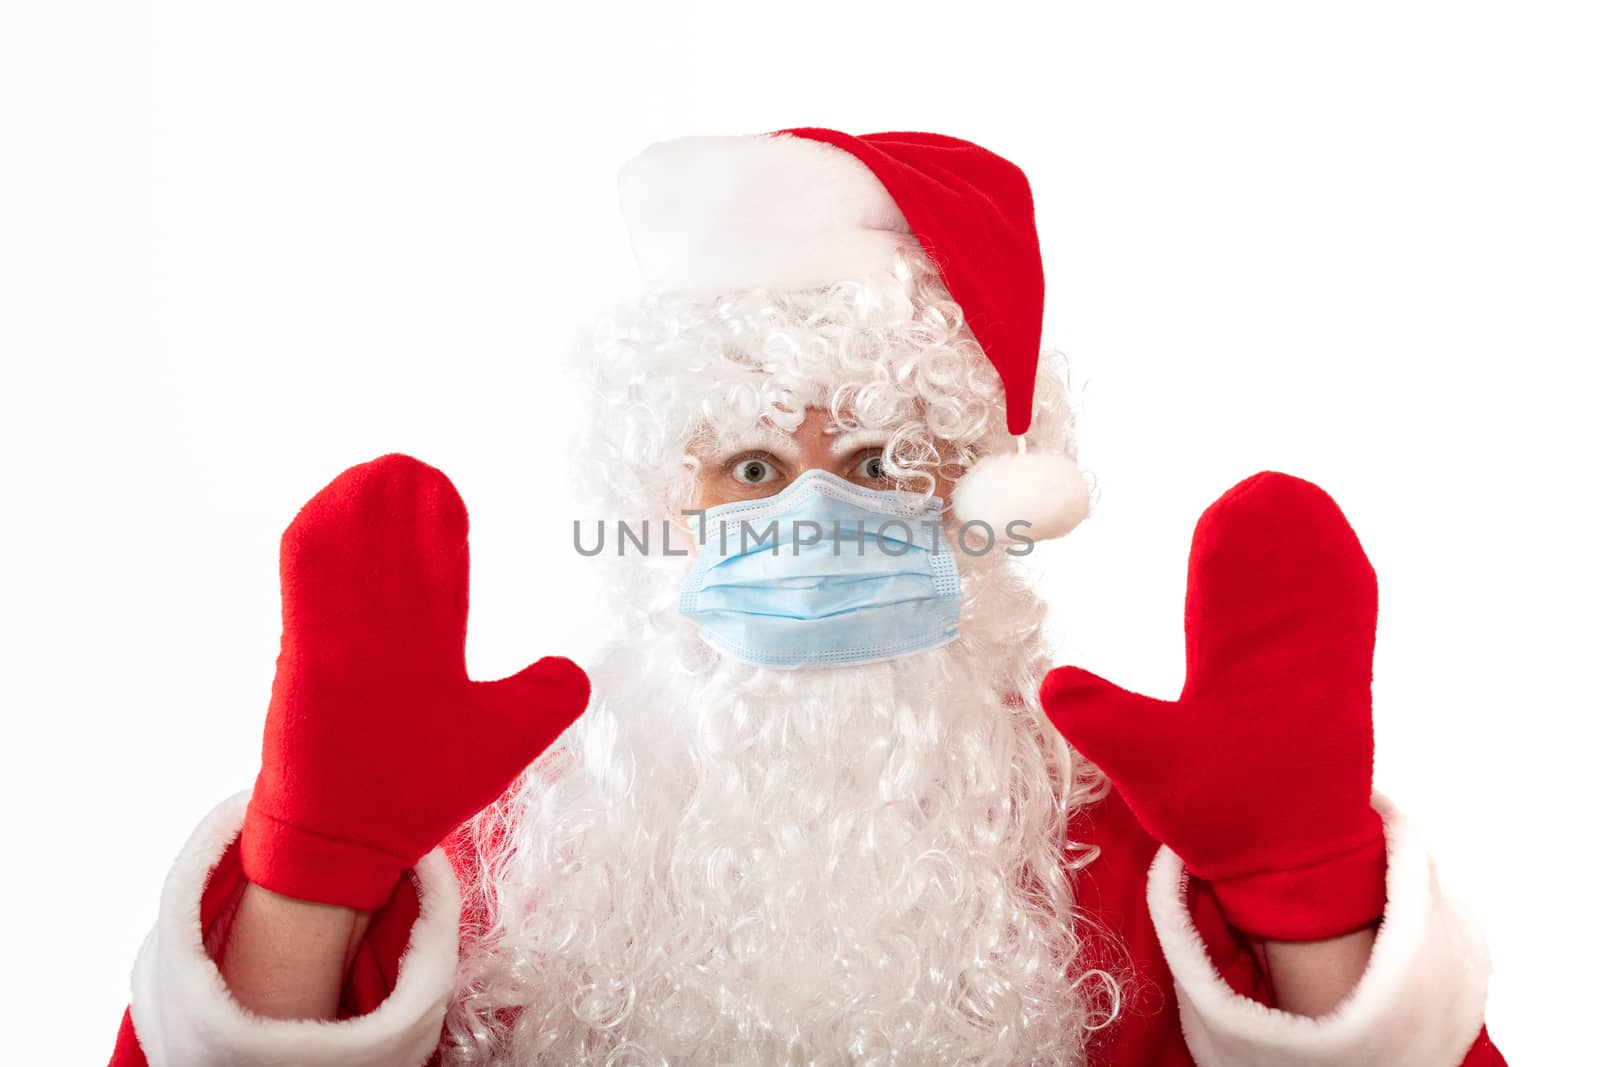 View of a man wearing a Santa Claus costume, medical mask and having his both hands up, eyes wide open, as if warning or stopping something, isolated on white background. Pandemic holiday concepts.